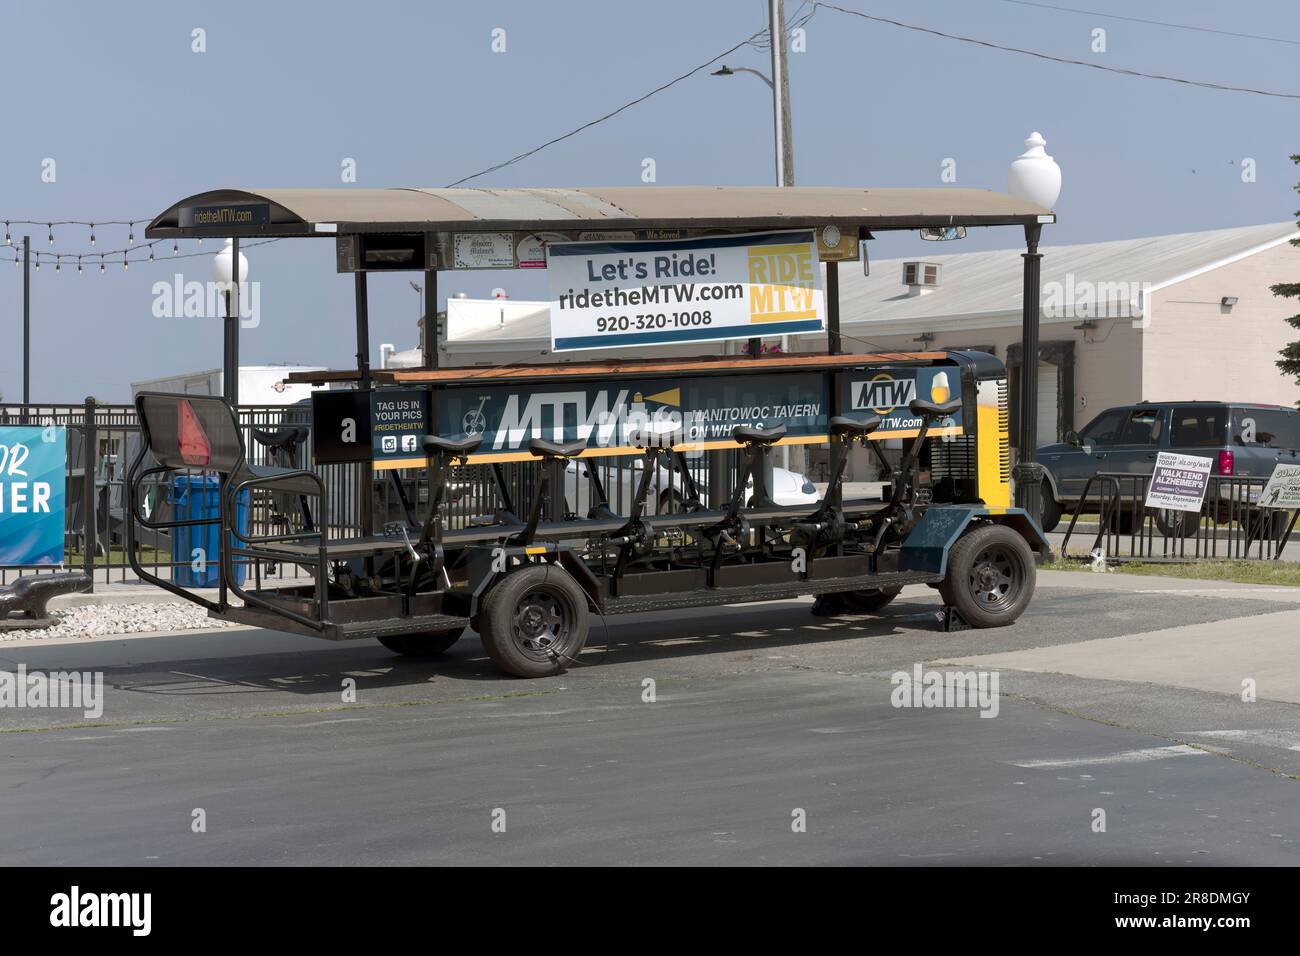 Manitowoc, WI USA Jun 20 2023: The Manitowoc Tavern on Wheels-  pedal-powered, eco-friendly, city-crawler,14-person pedal-powered trolley. Stock Photo